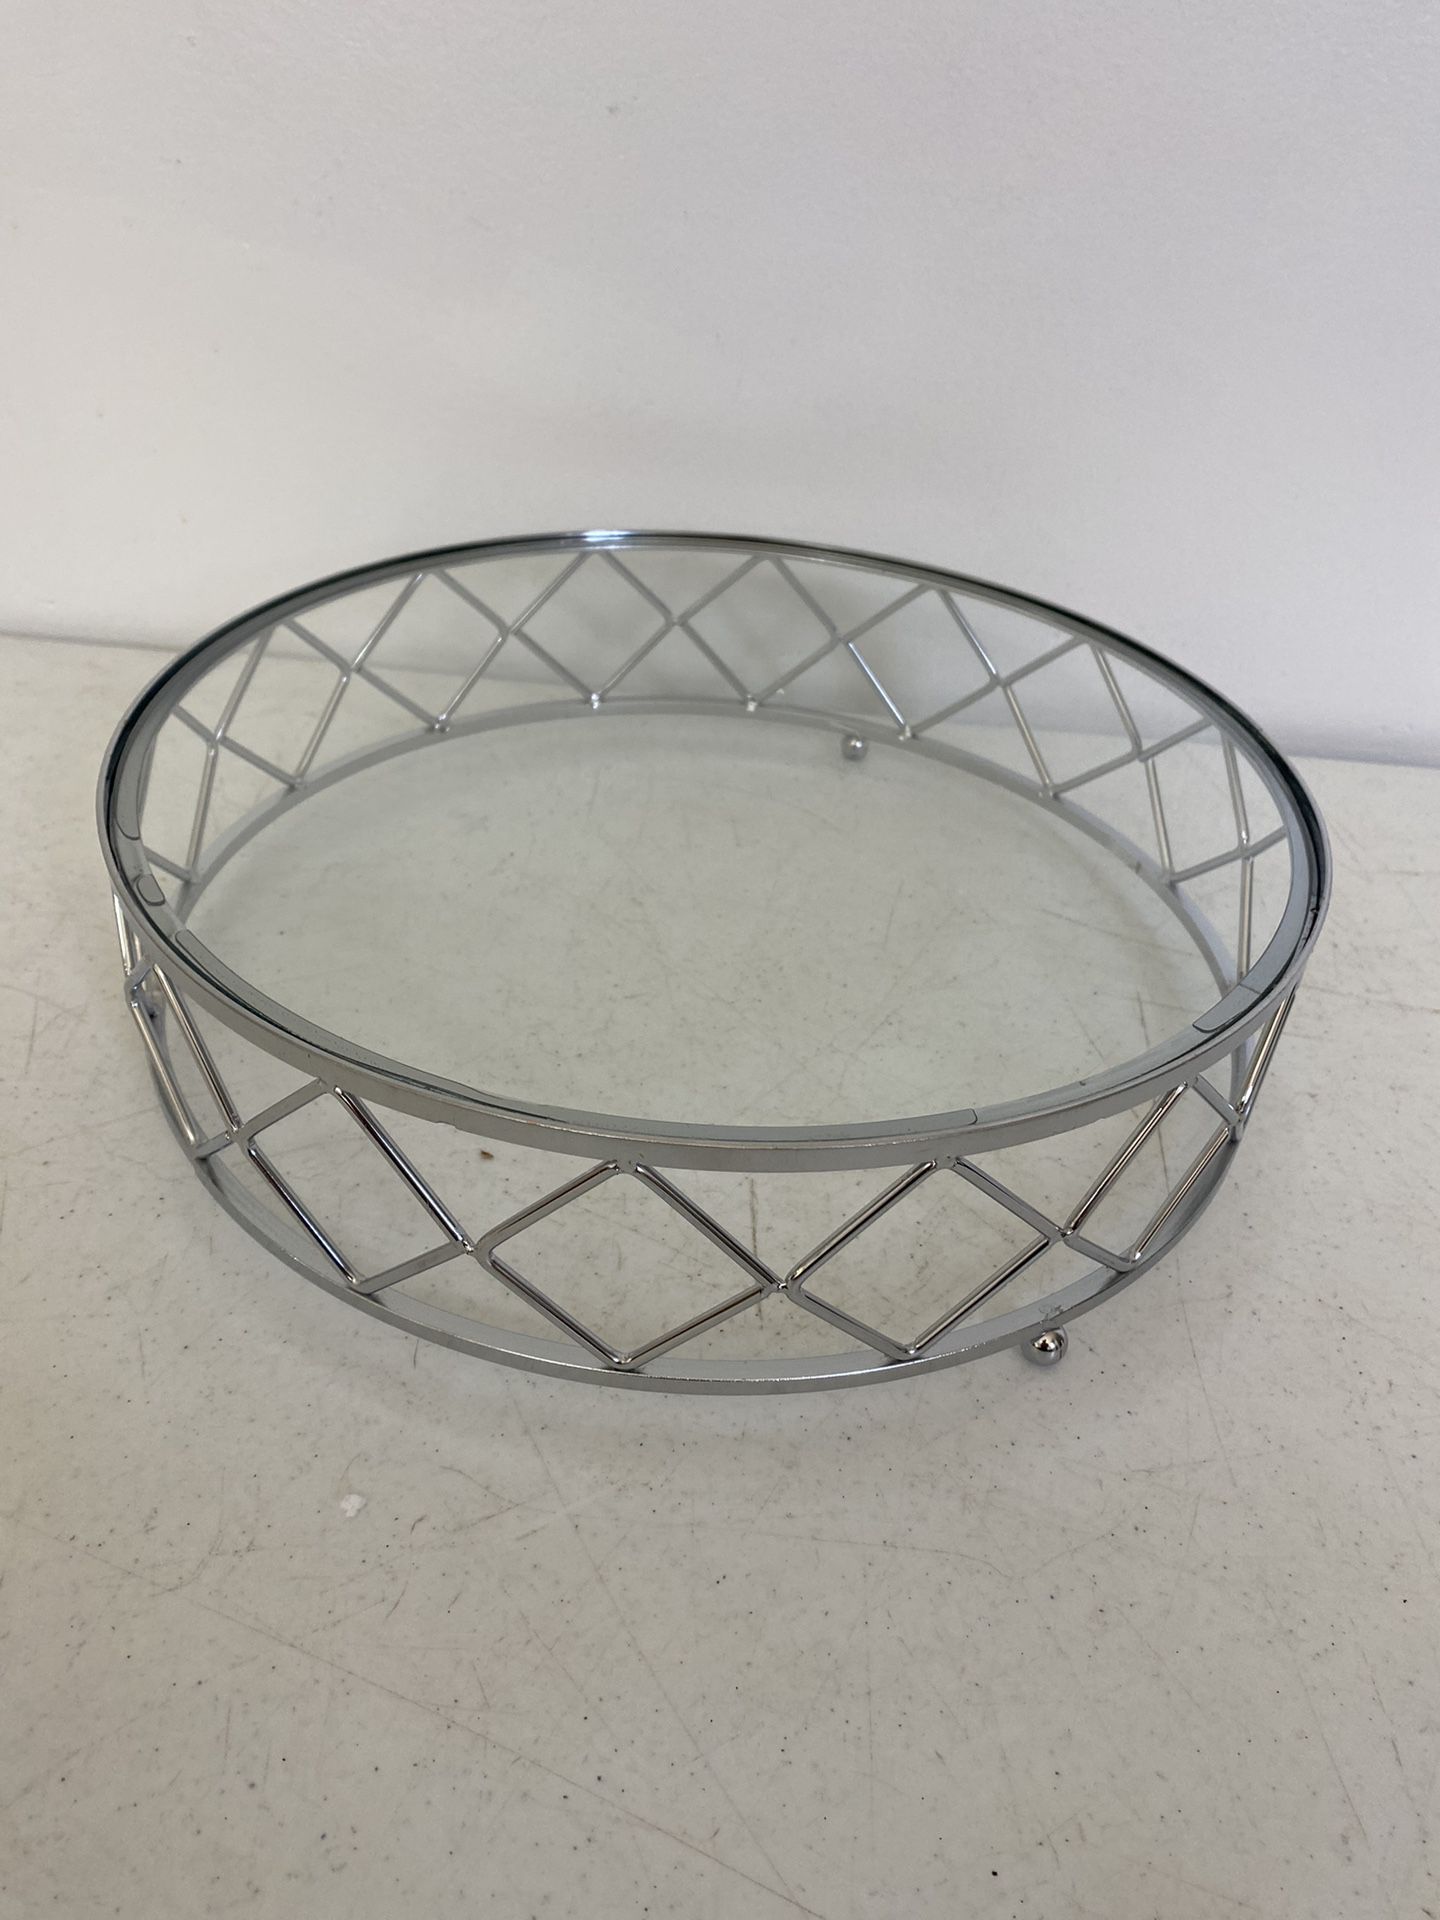 New! Glass Top Metal Silver 14”round  Geometric Cake Stand Wedding,Bridal shower,baby shower,events